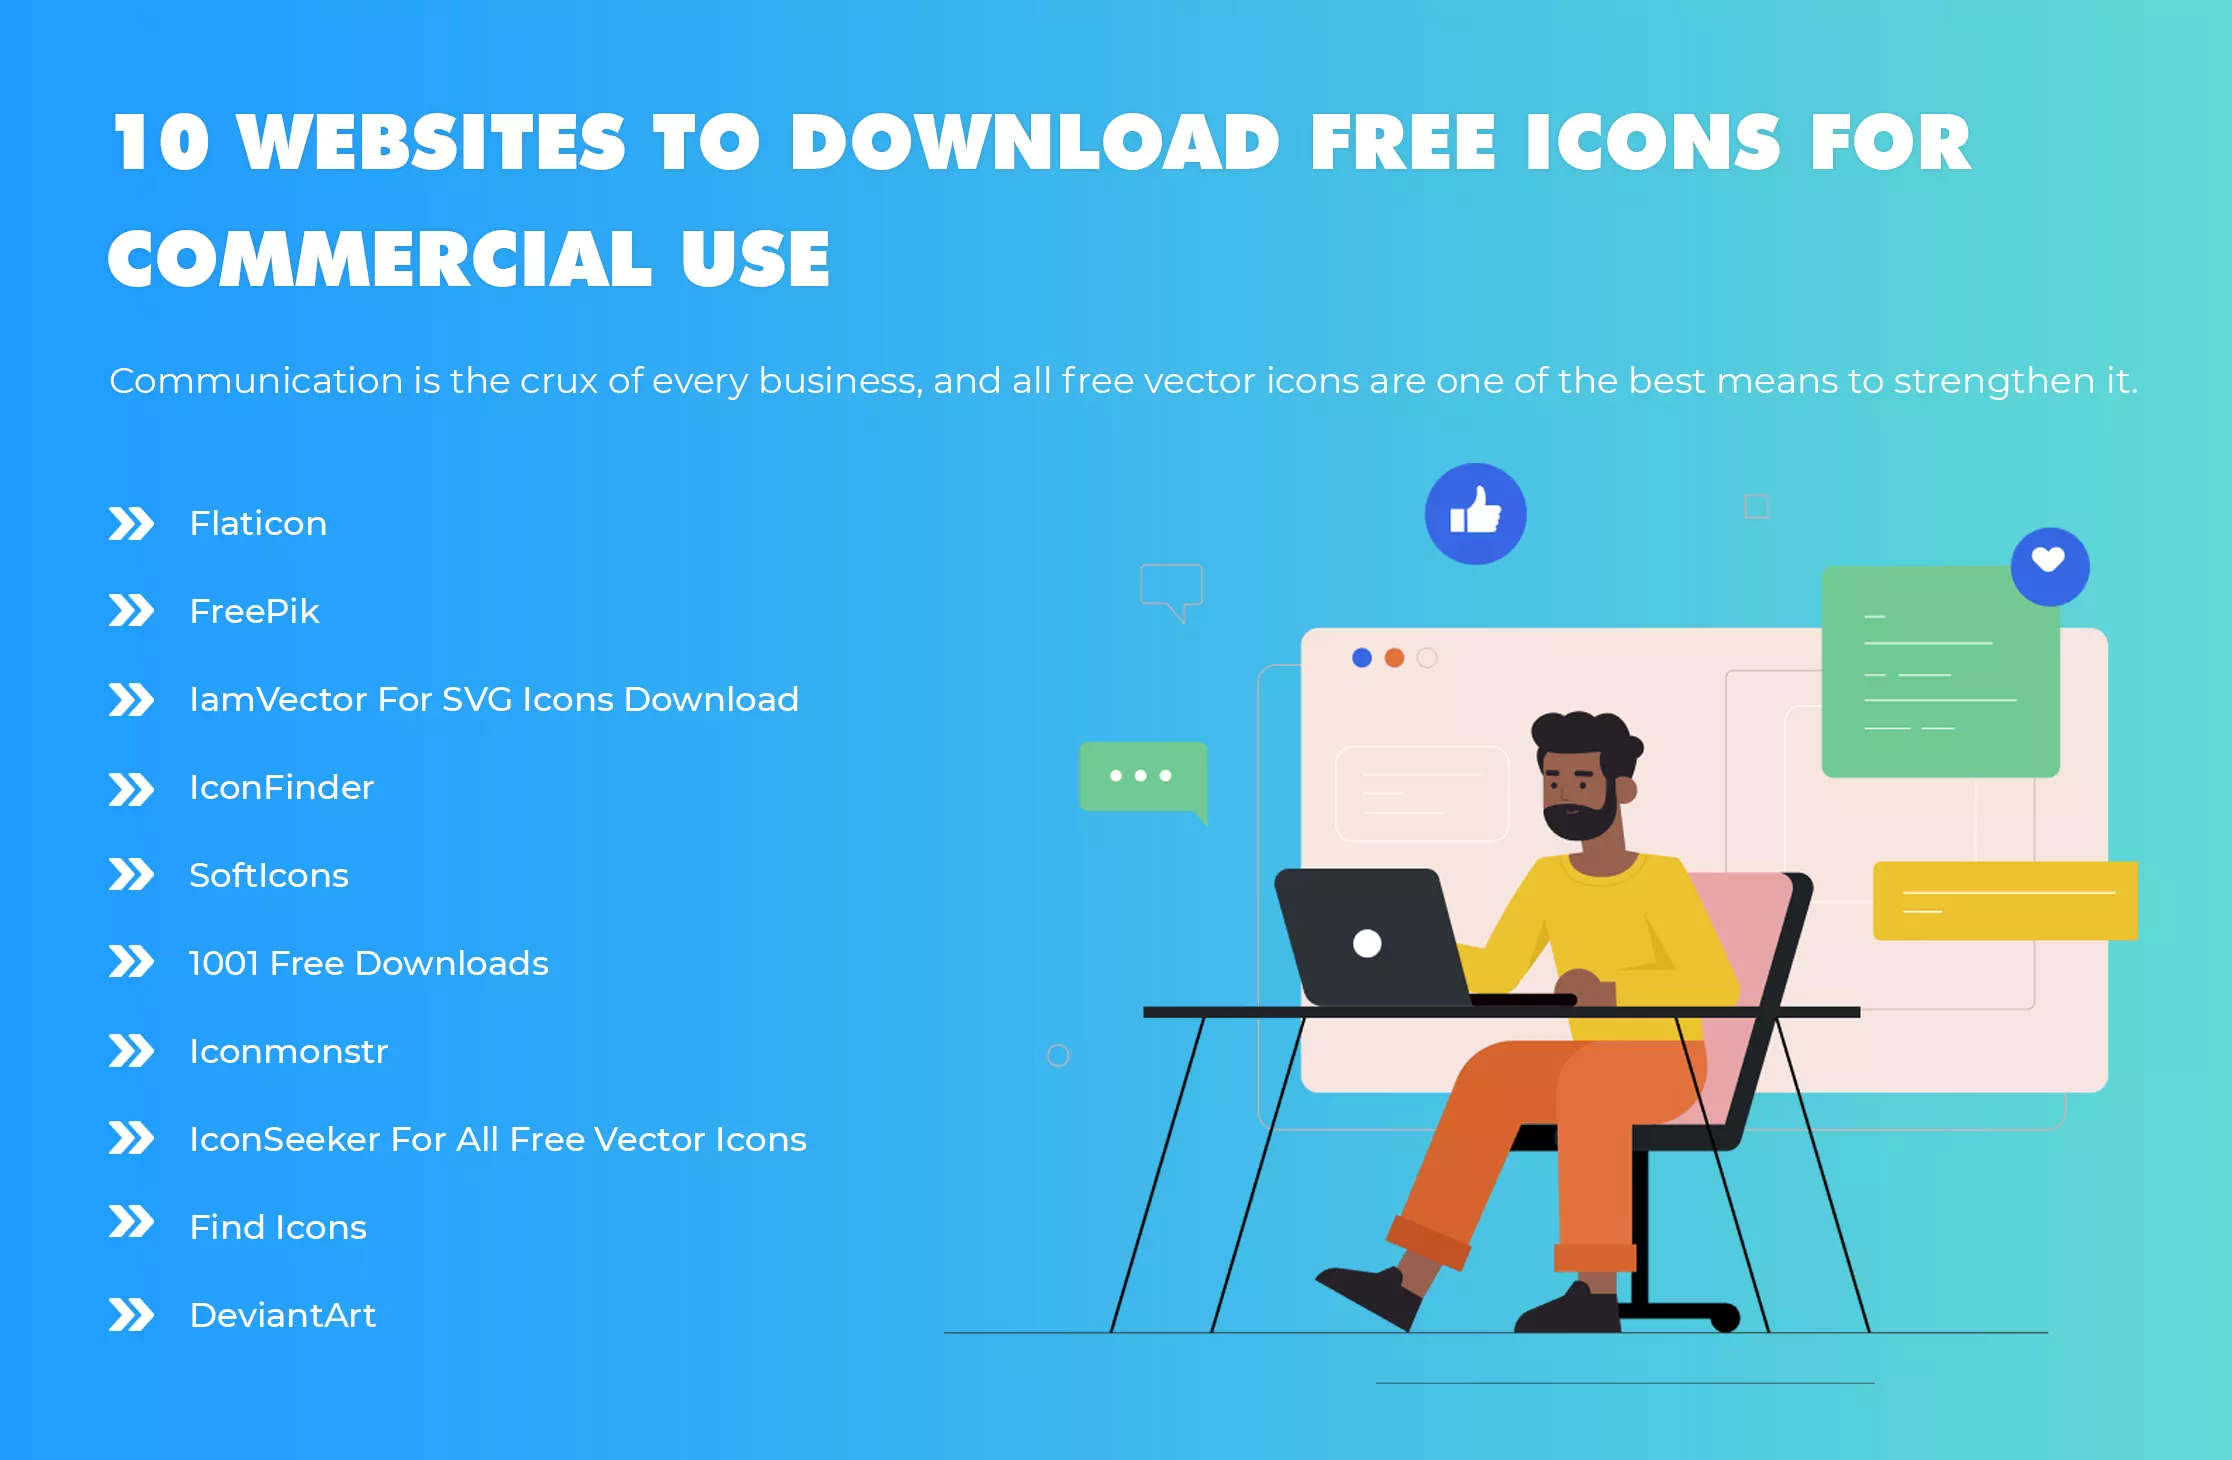 Websites to Download Free Icons for Commercial Use